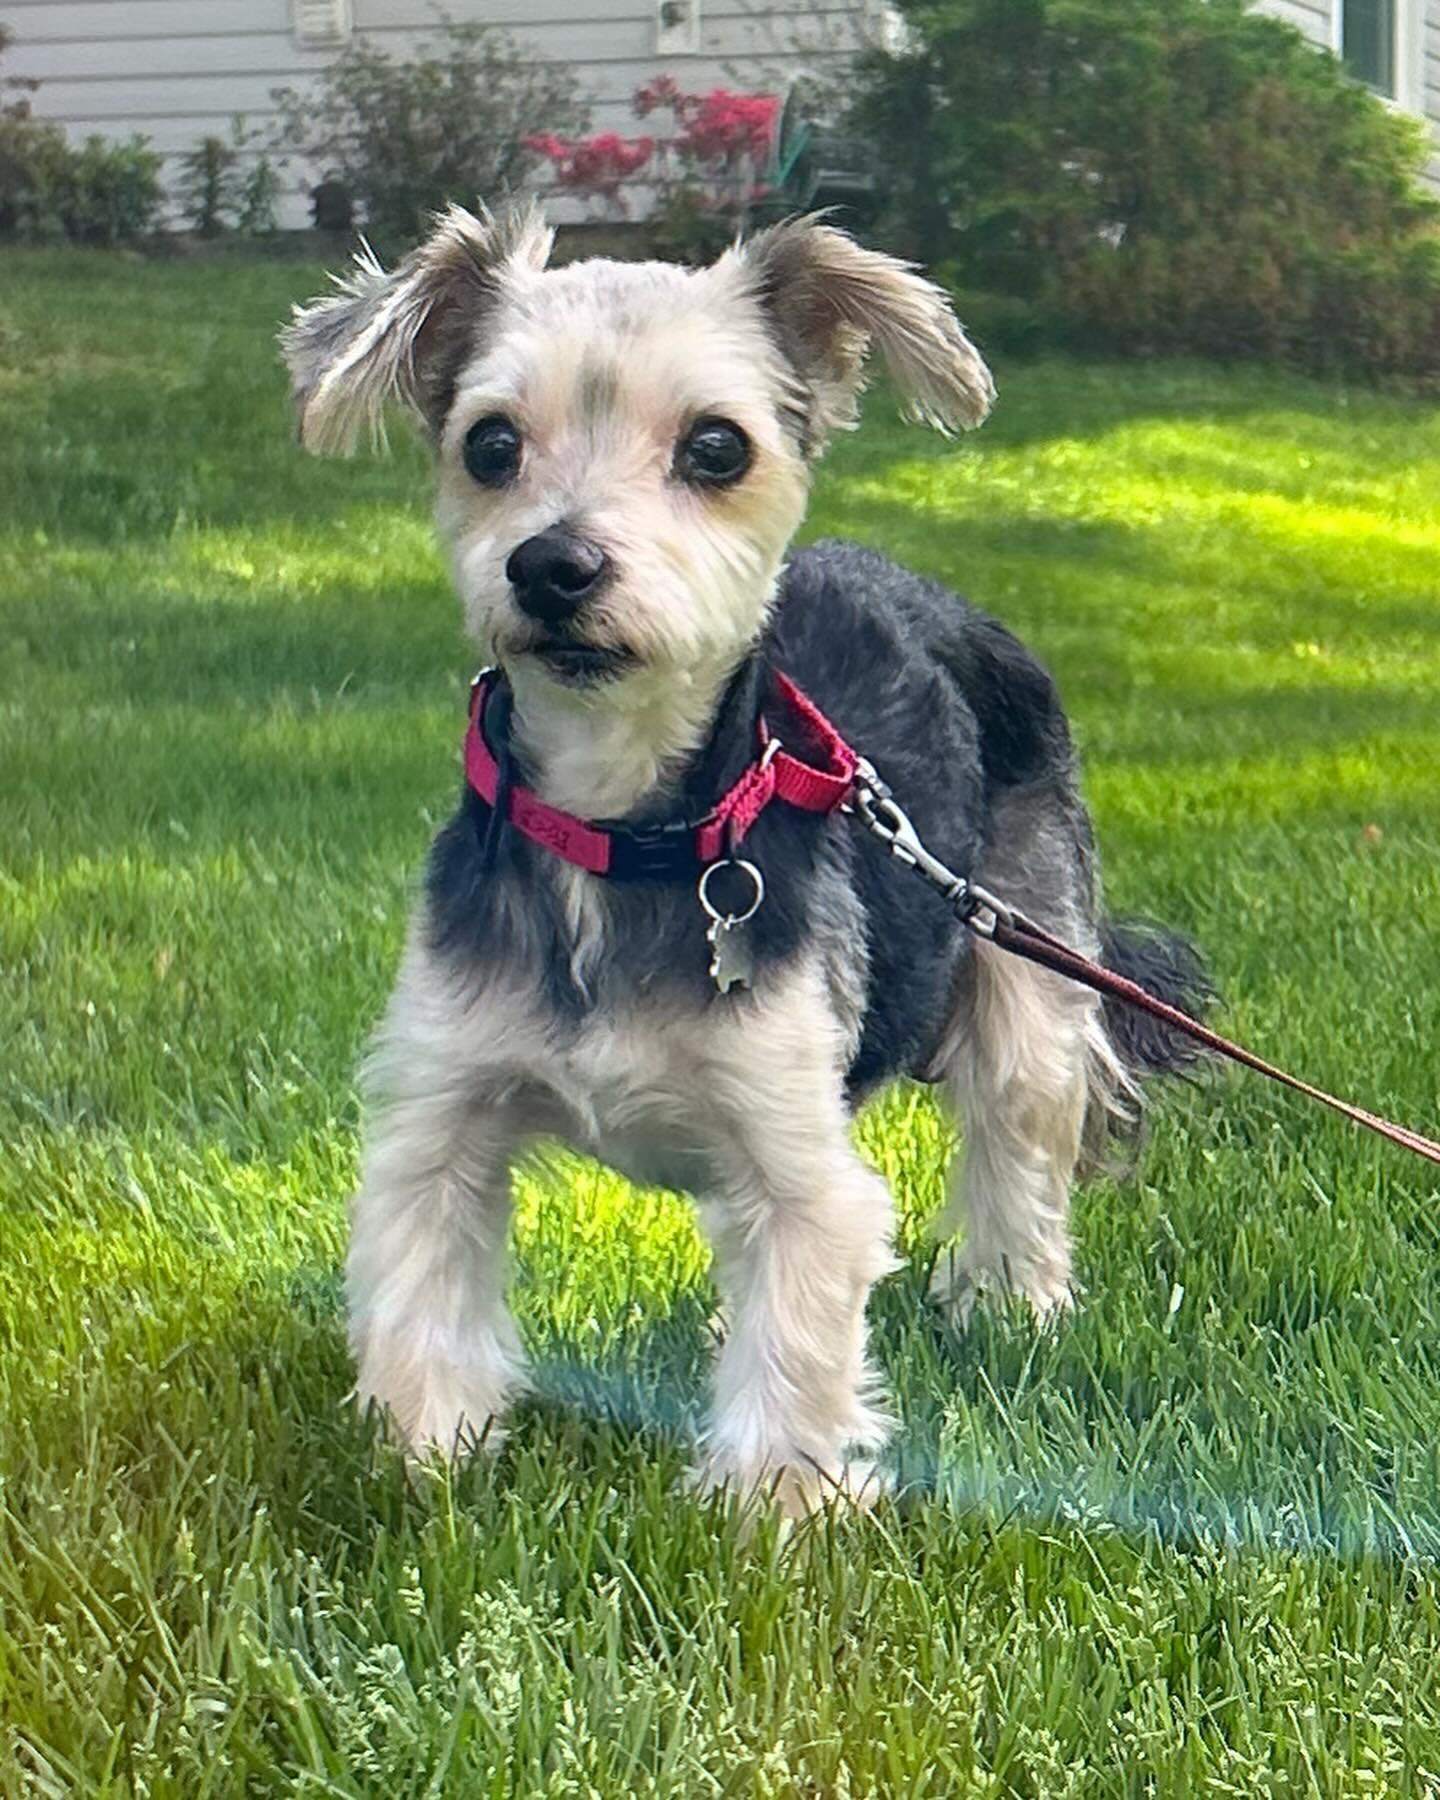 Introducing Sir Winston, the dapper 10-12 year old, 8lb Yorkie who proves age is but a number! Despite his senior status, Winston is full of life and still has plenty of pep in his step. This sweet boy is the epitome of happiness, with a great appeti